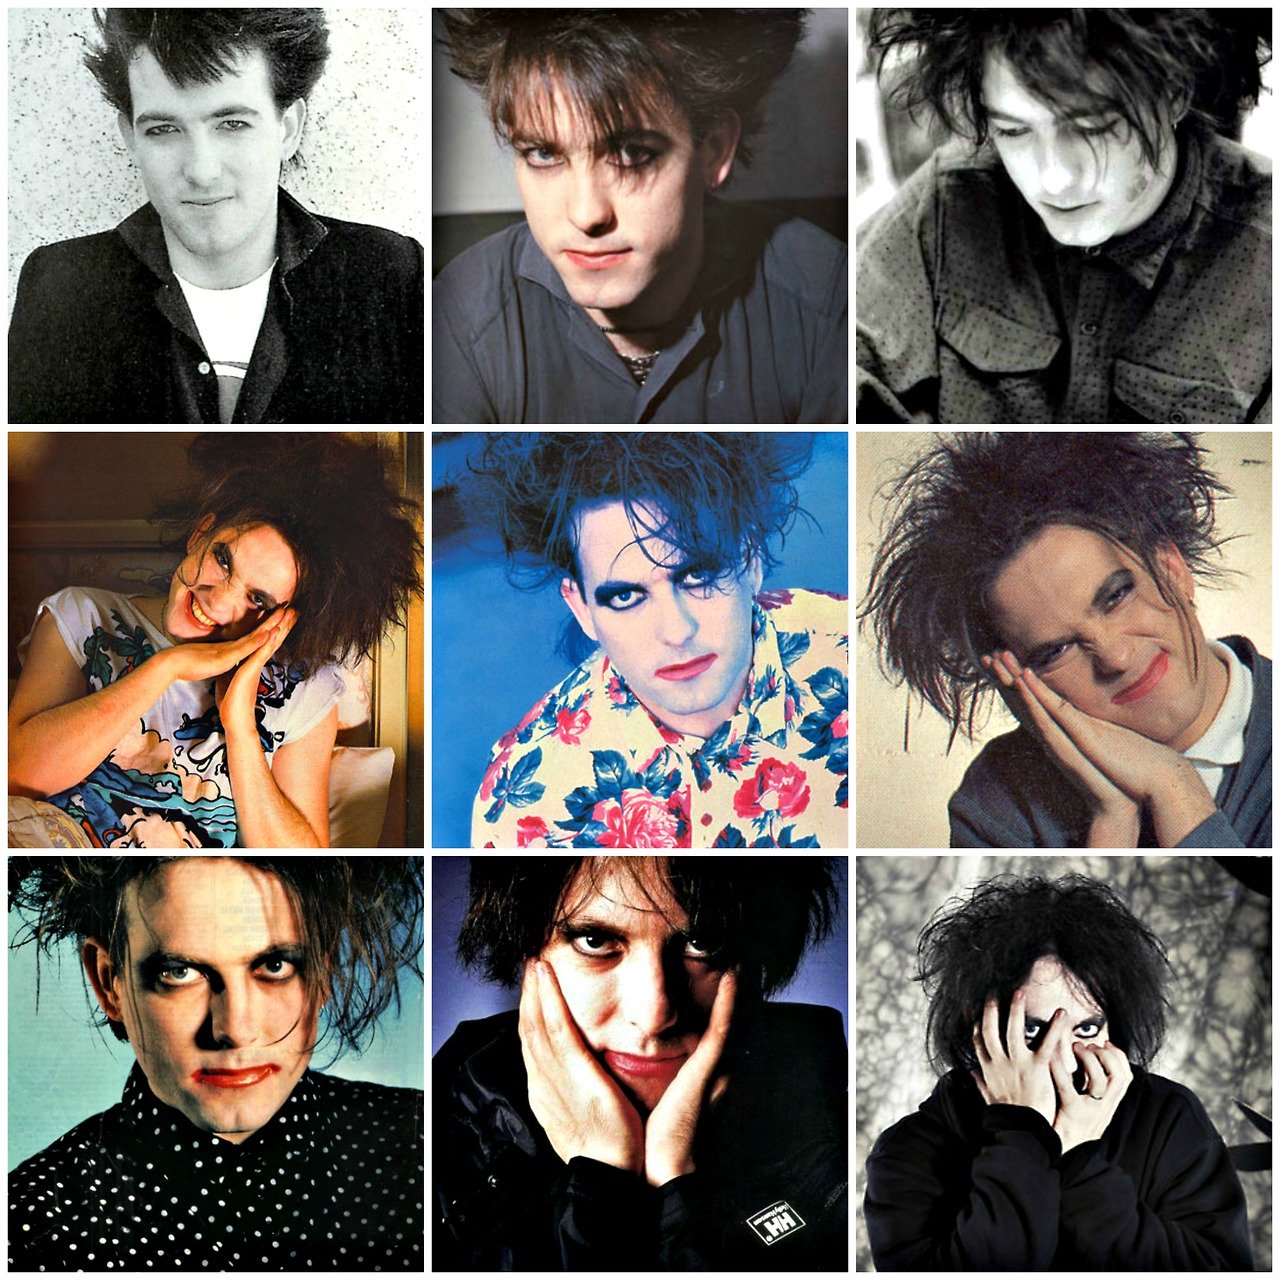 A very happy birthday to Robert Smith of born 21st April 1959 